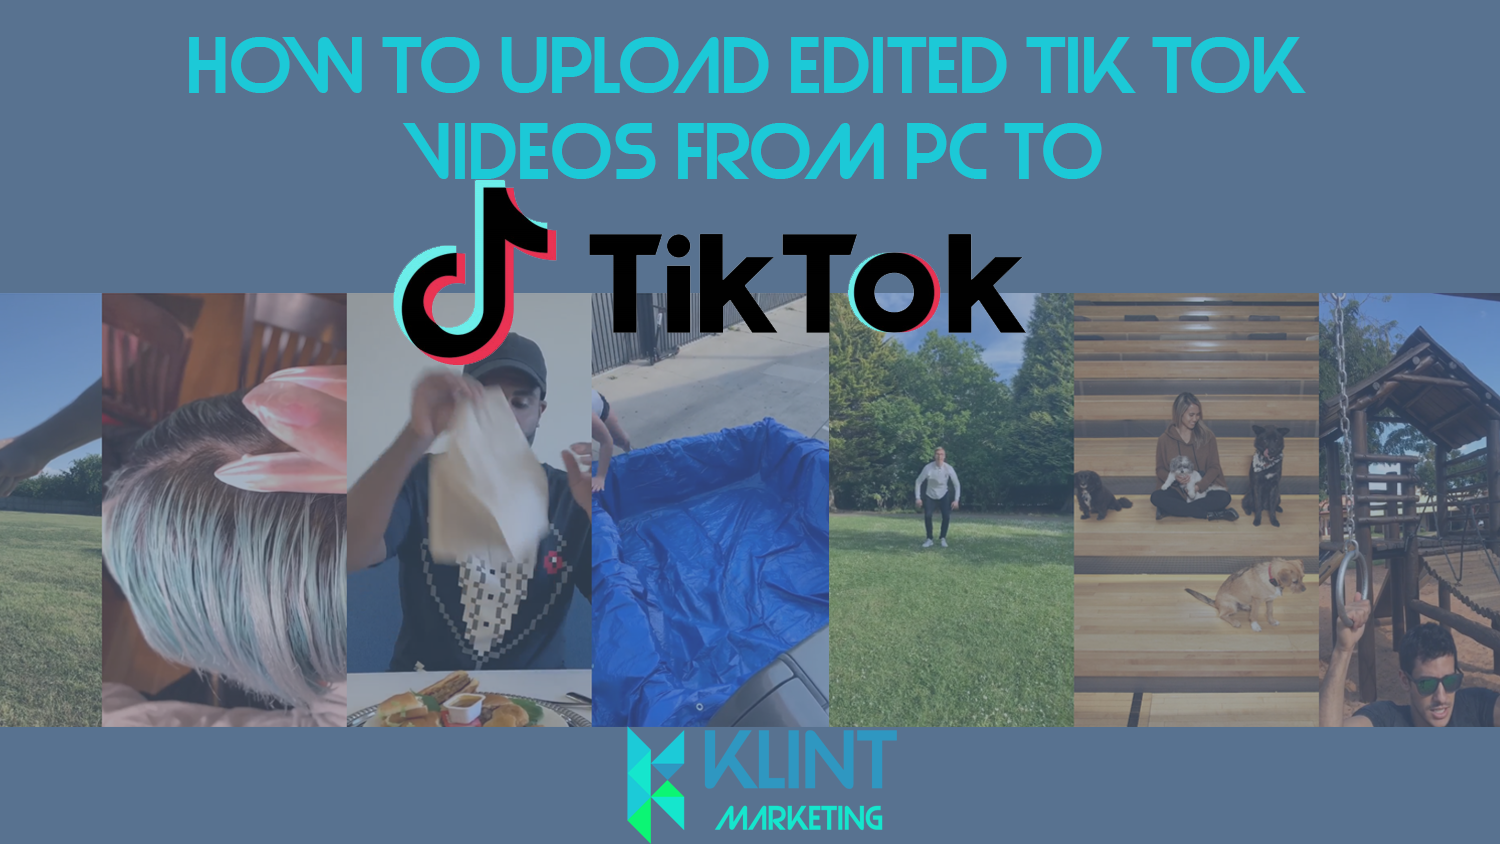 How To Upload Edited Tik Tok Videos From Pc To Tik Tok 2020 Klint Marketing The Best Growth Hacking Agency In Copenhagen - download my roblox account was hacked story mp4 3gp